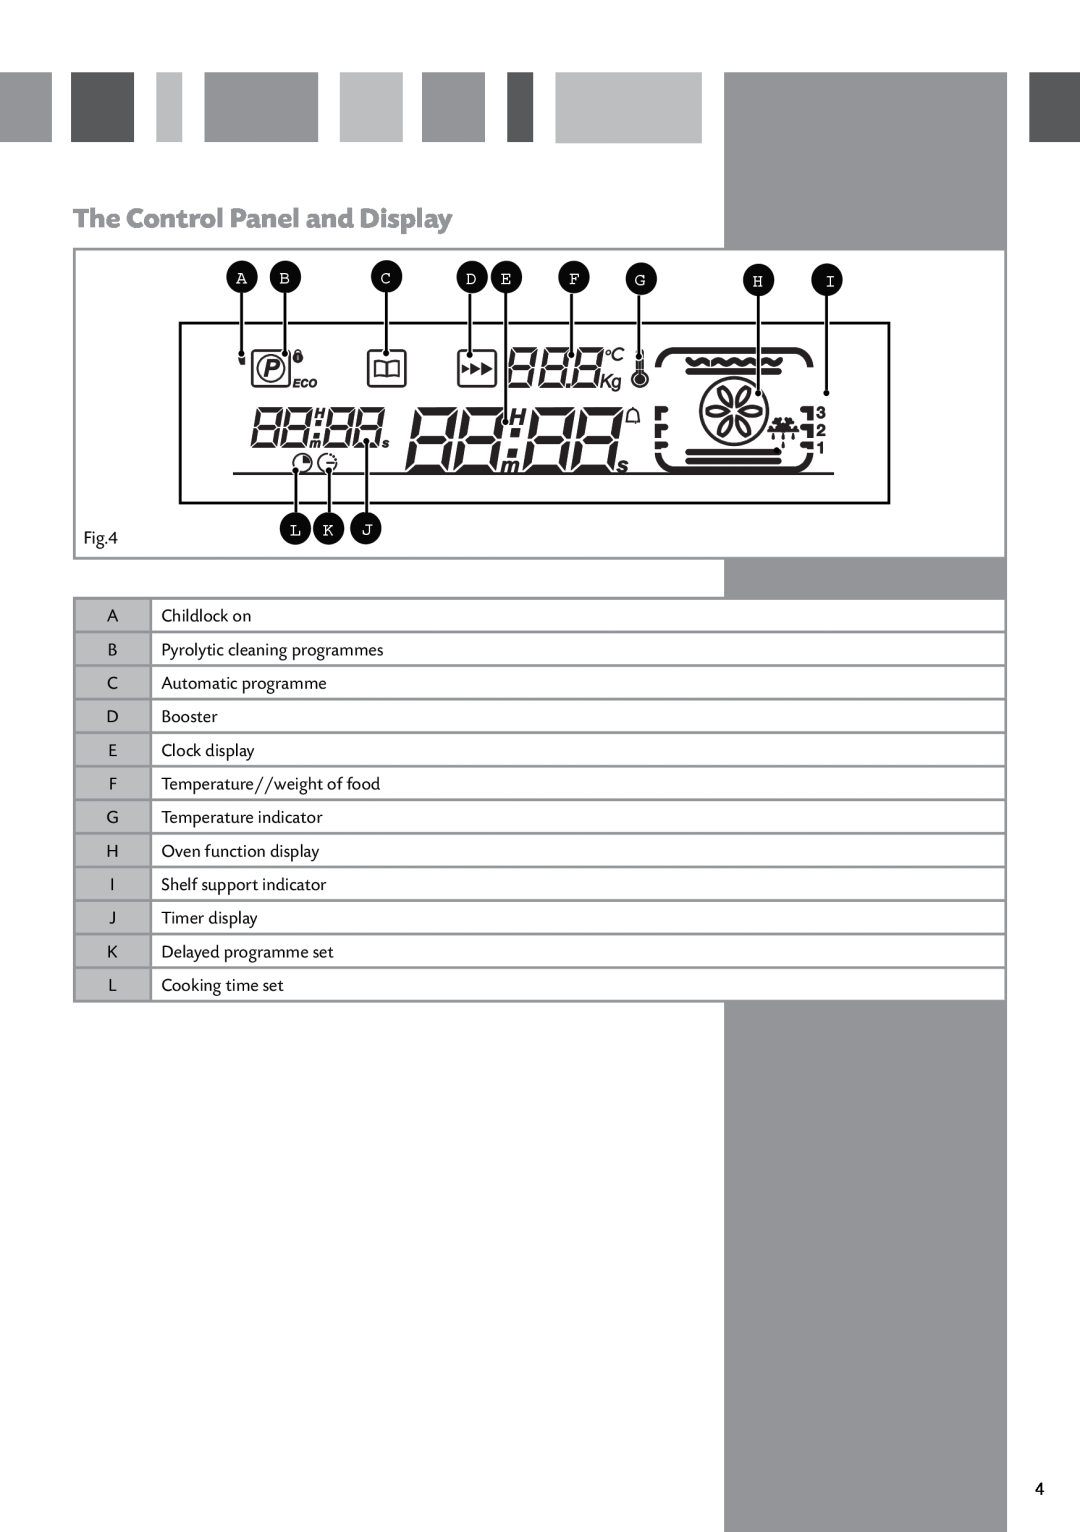 CDA SV470 manual The Control Panel and Display, A Childlock on B Pyrolytic cleaning programmes C Automatic programme 